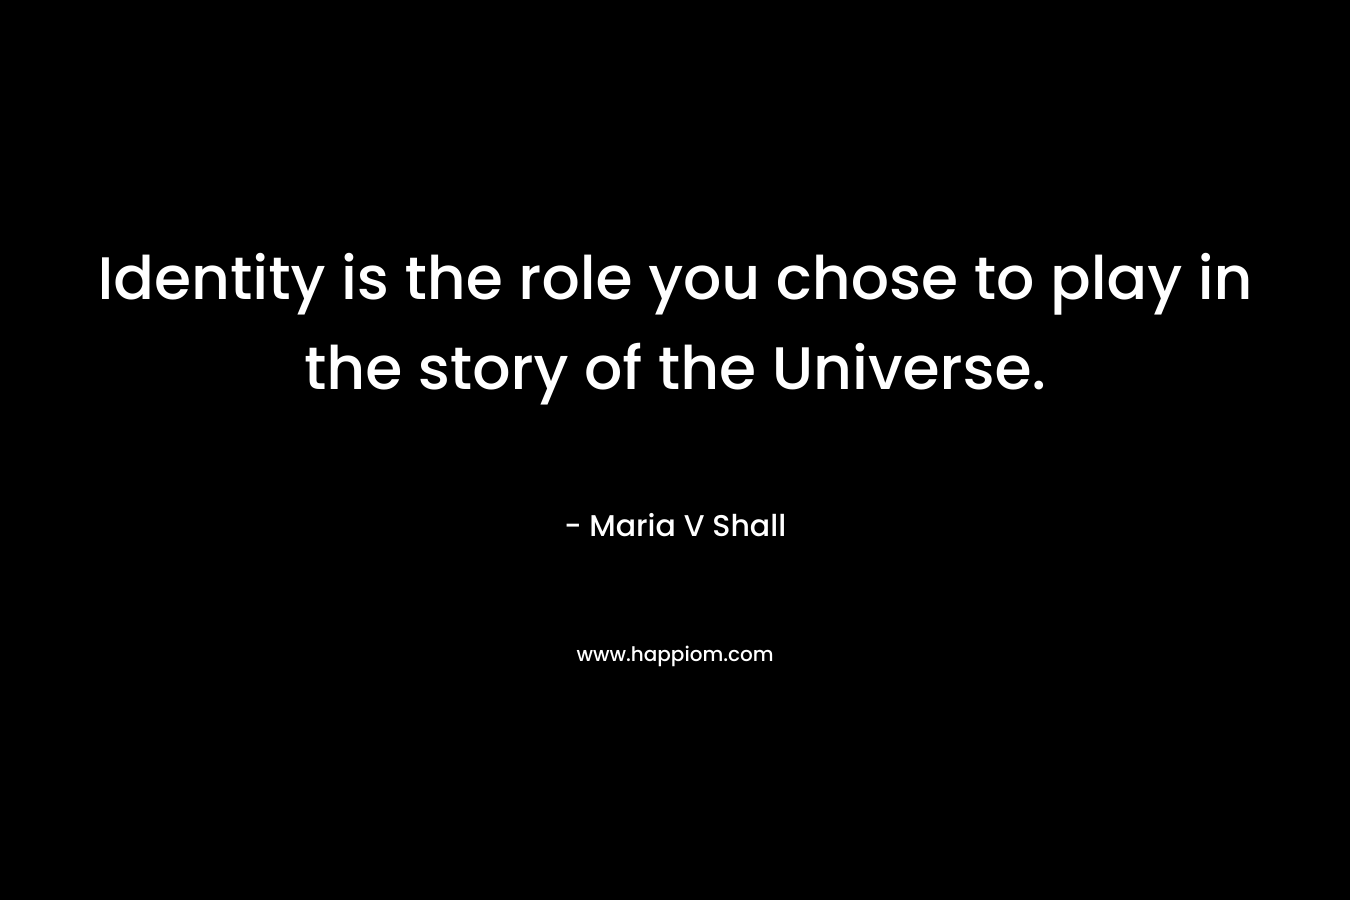 Identity is the role you chose to play in the story of the Universe.